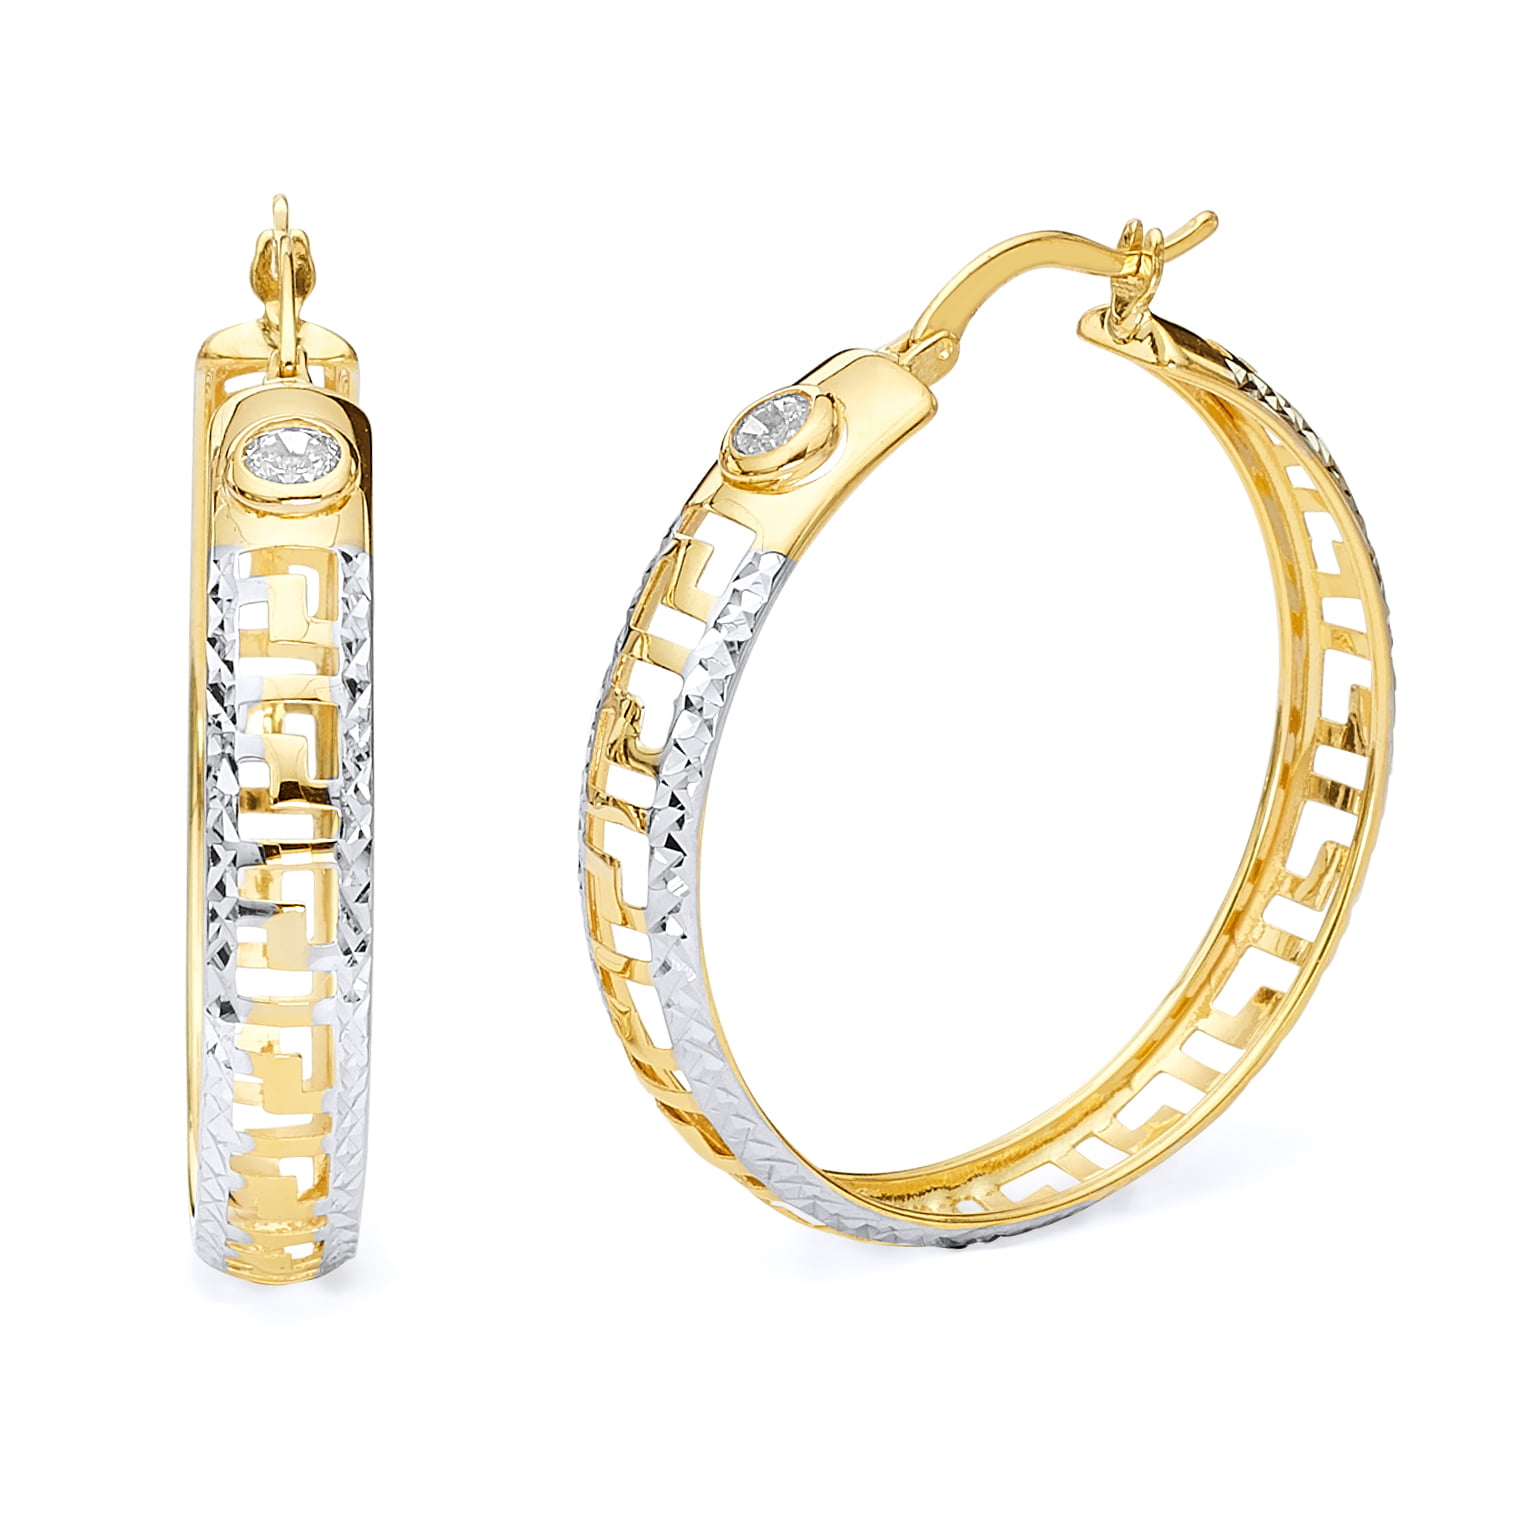 Wellingsale Ladies 14k Two 2 Tone White and Yellow Gold Polished 6mm Greek Design Hoop Earrings 28 x 28 mm